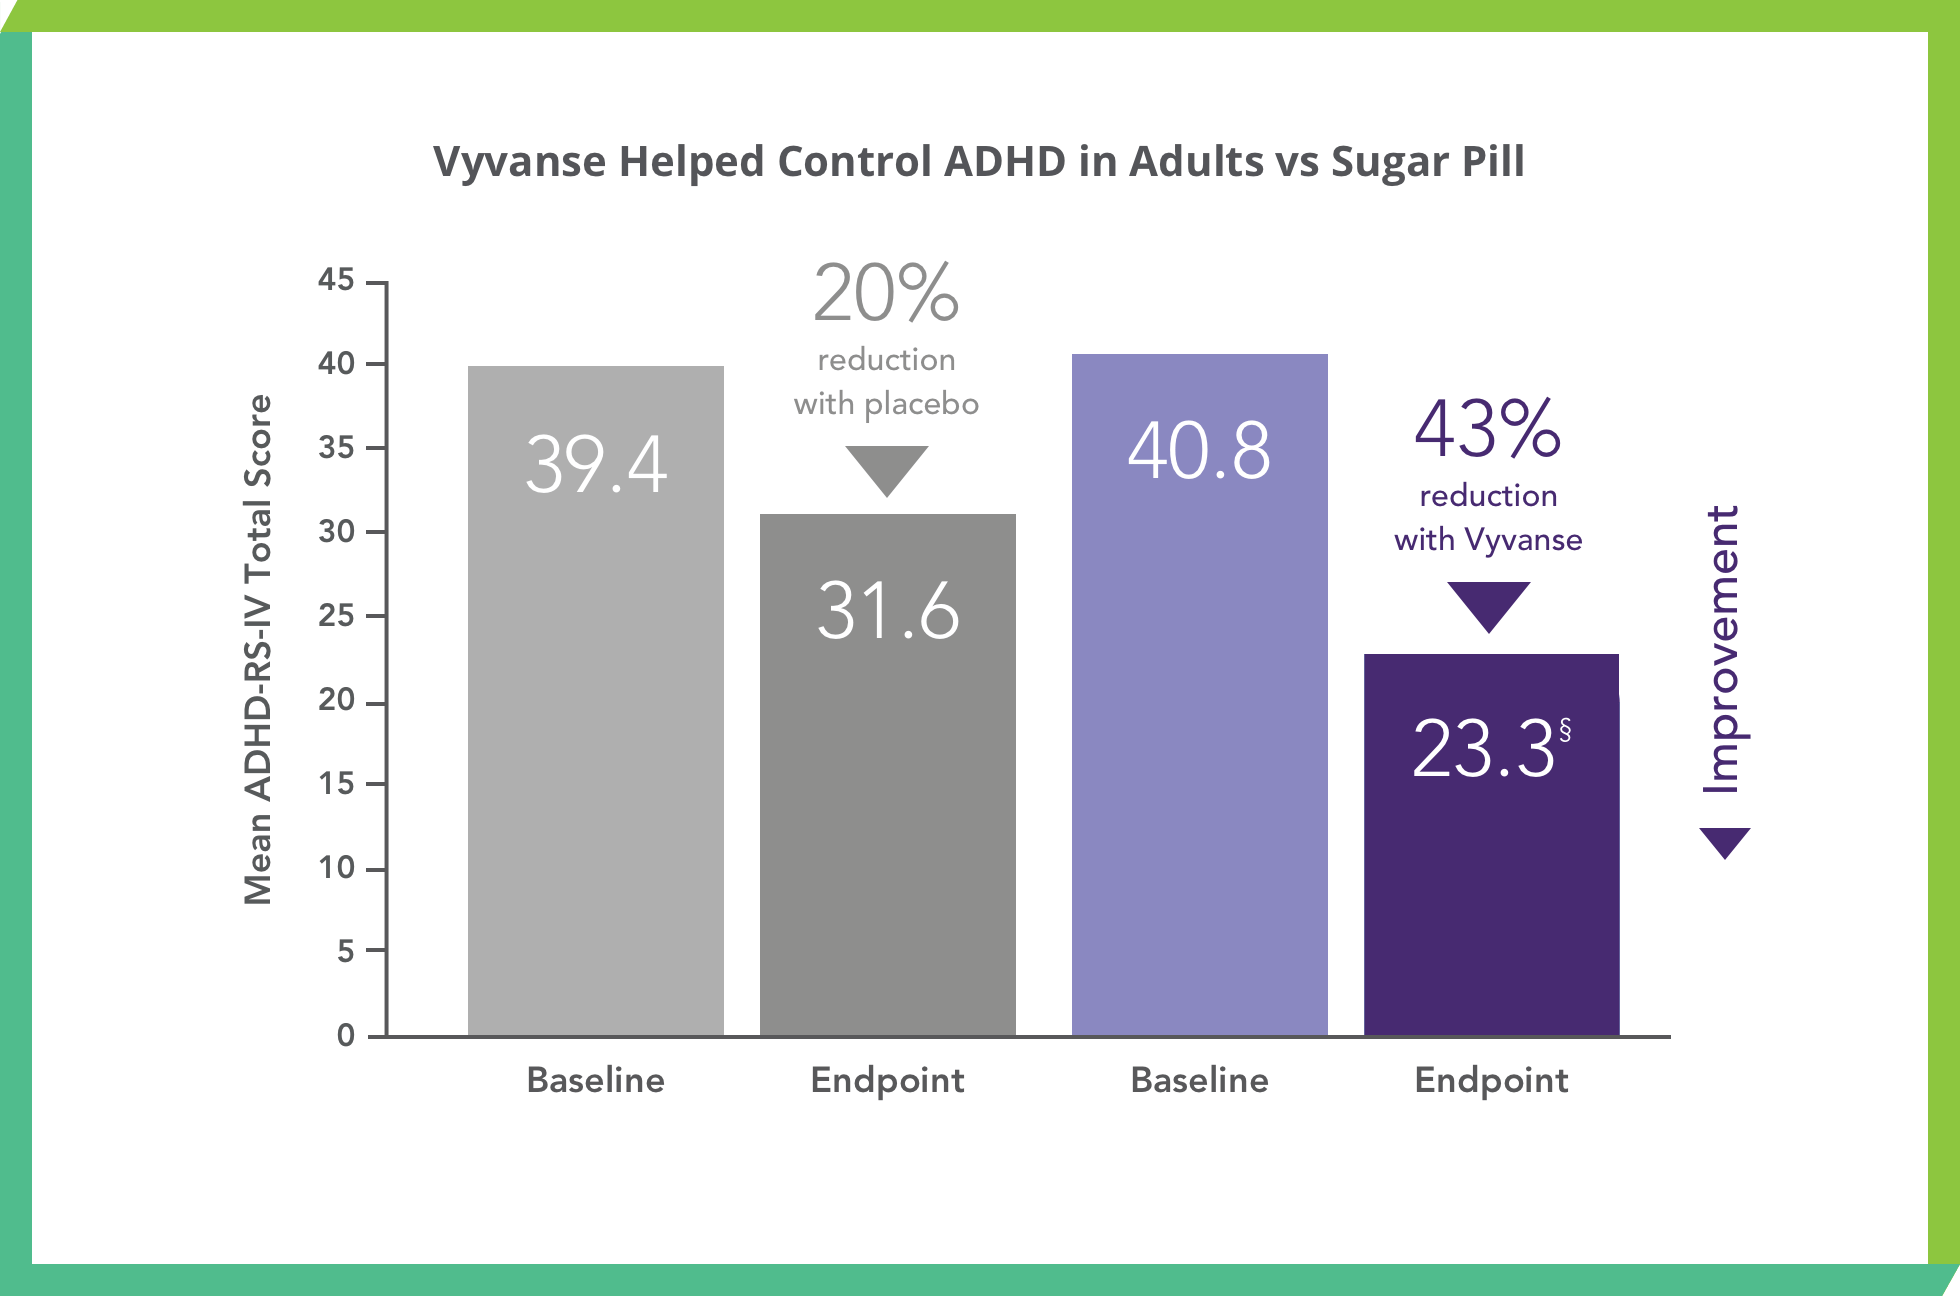 Graph depicting Vyvanse ADHD Efficacy Study Results